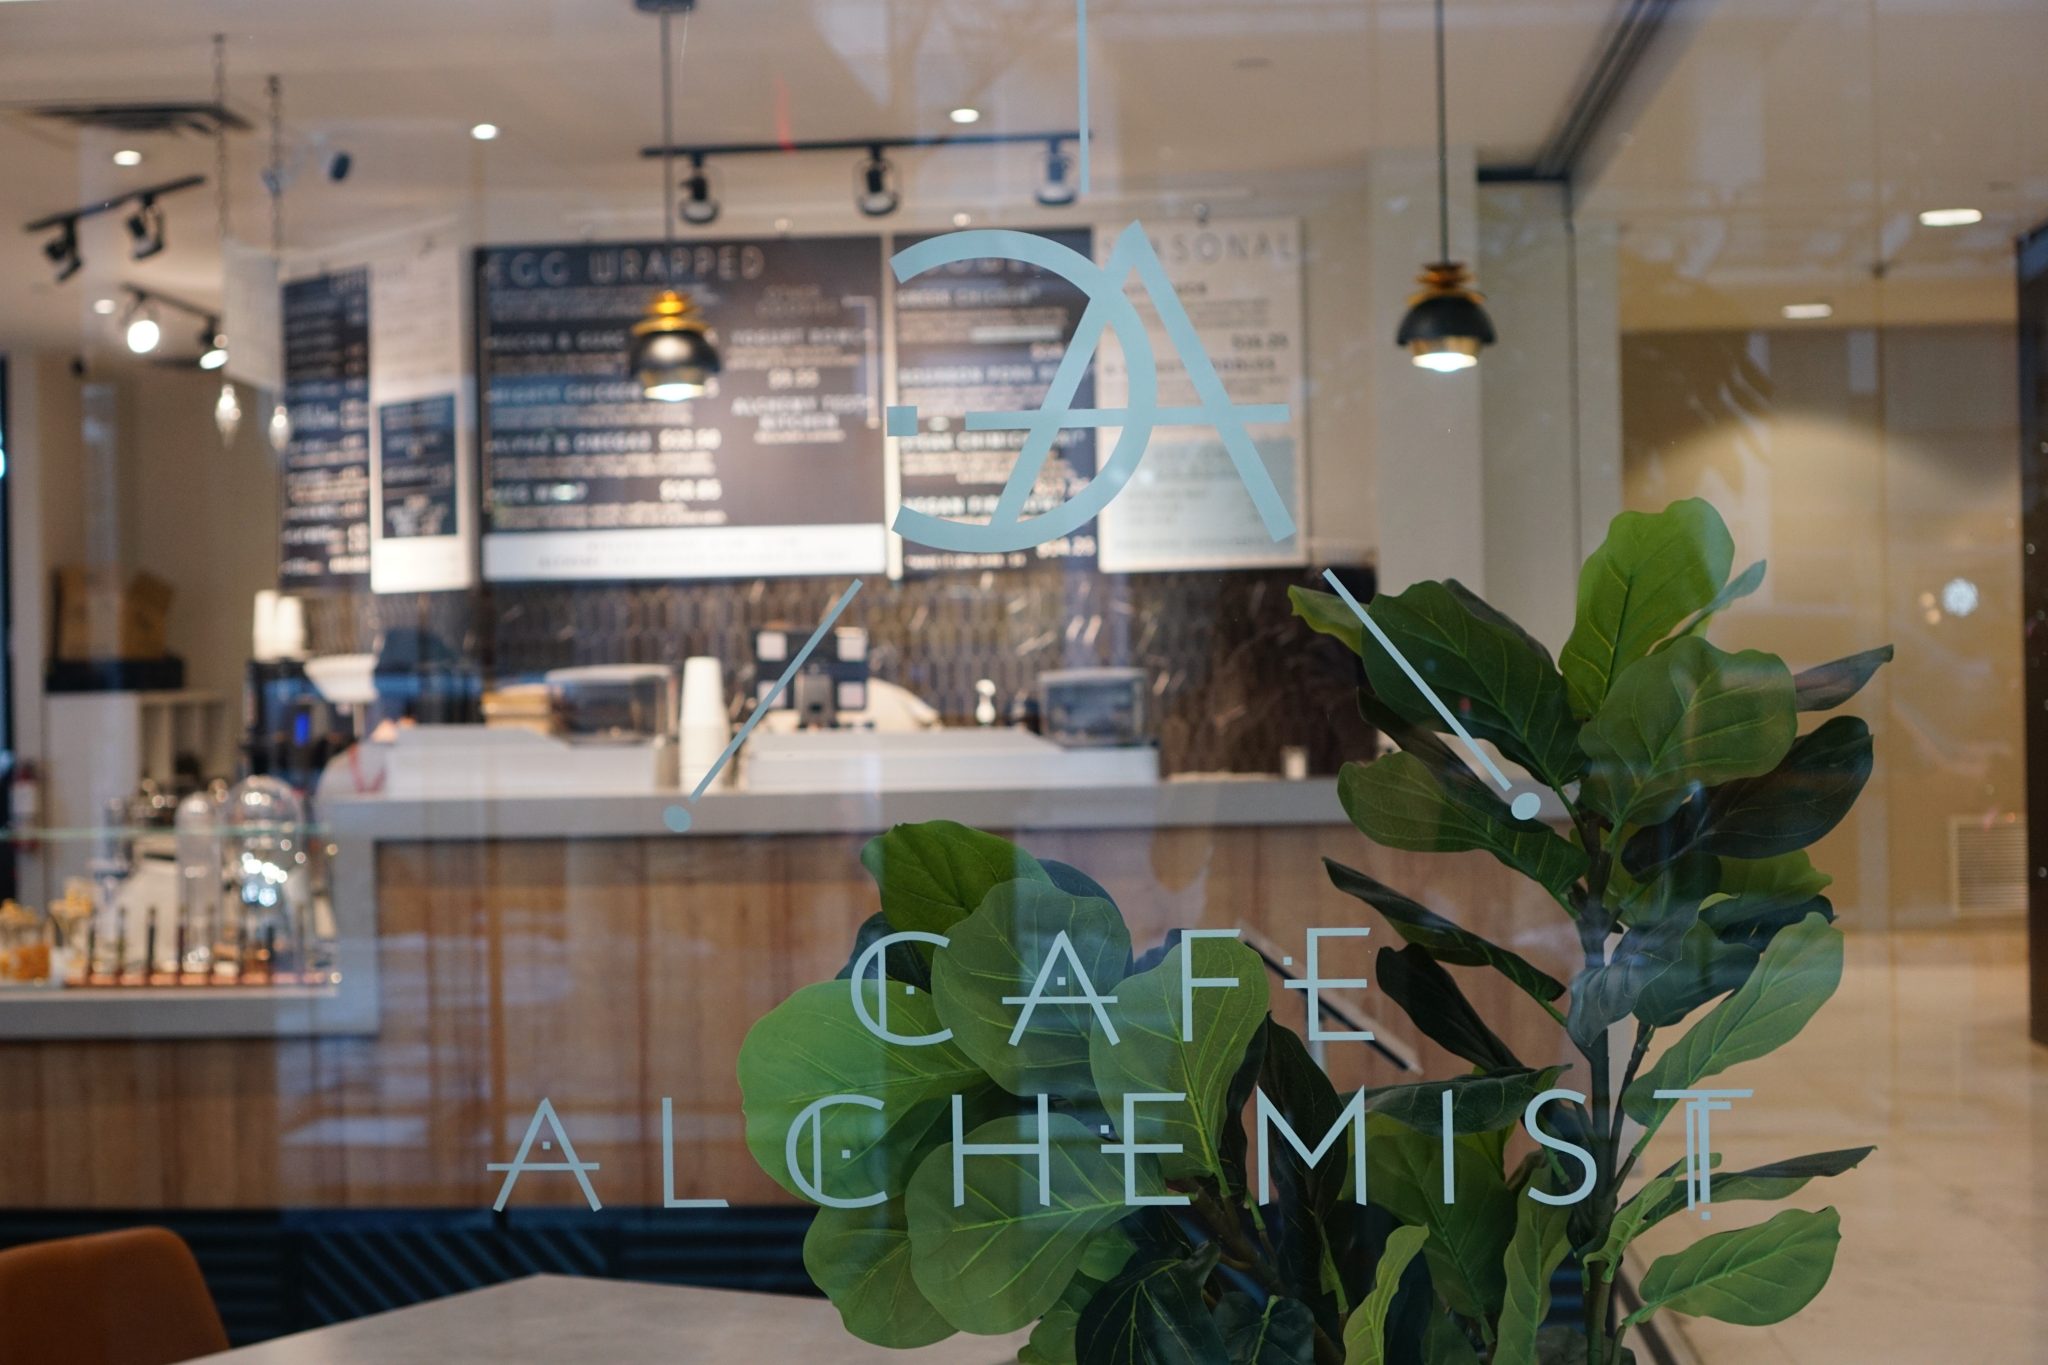 Looking through the window of Cafe Alchemist towards their counter.